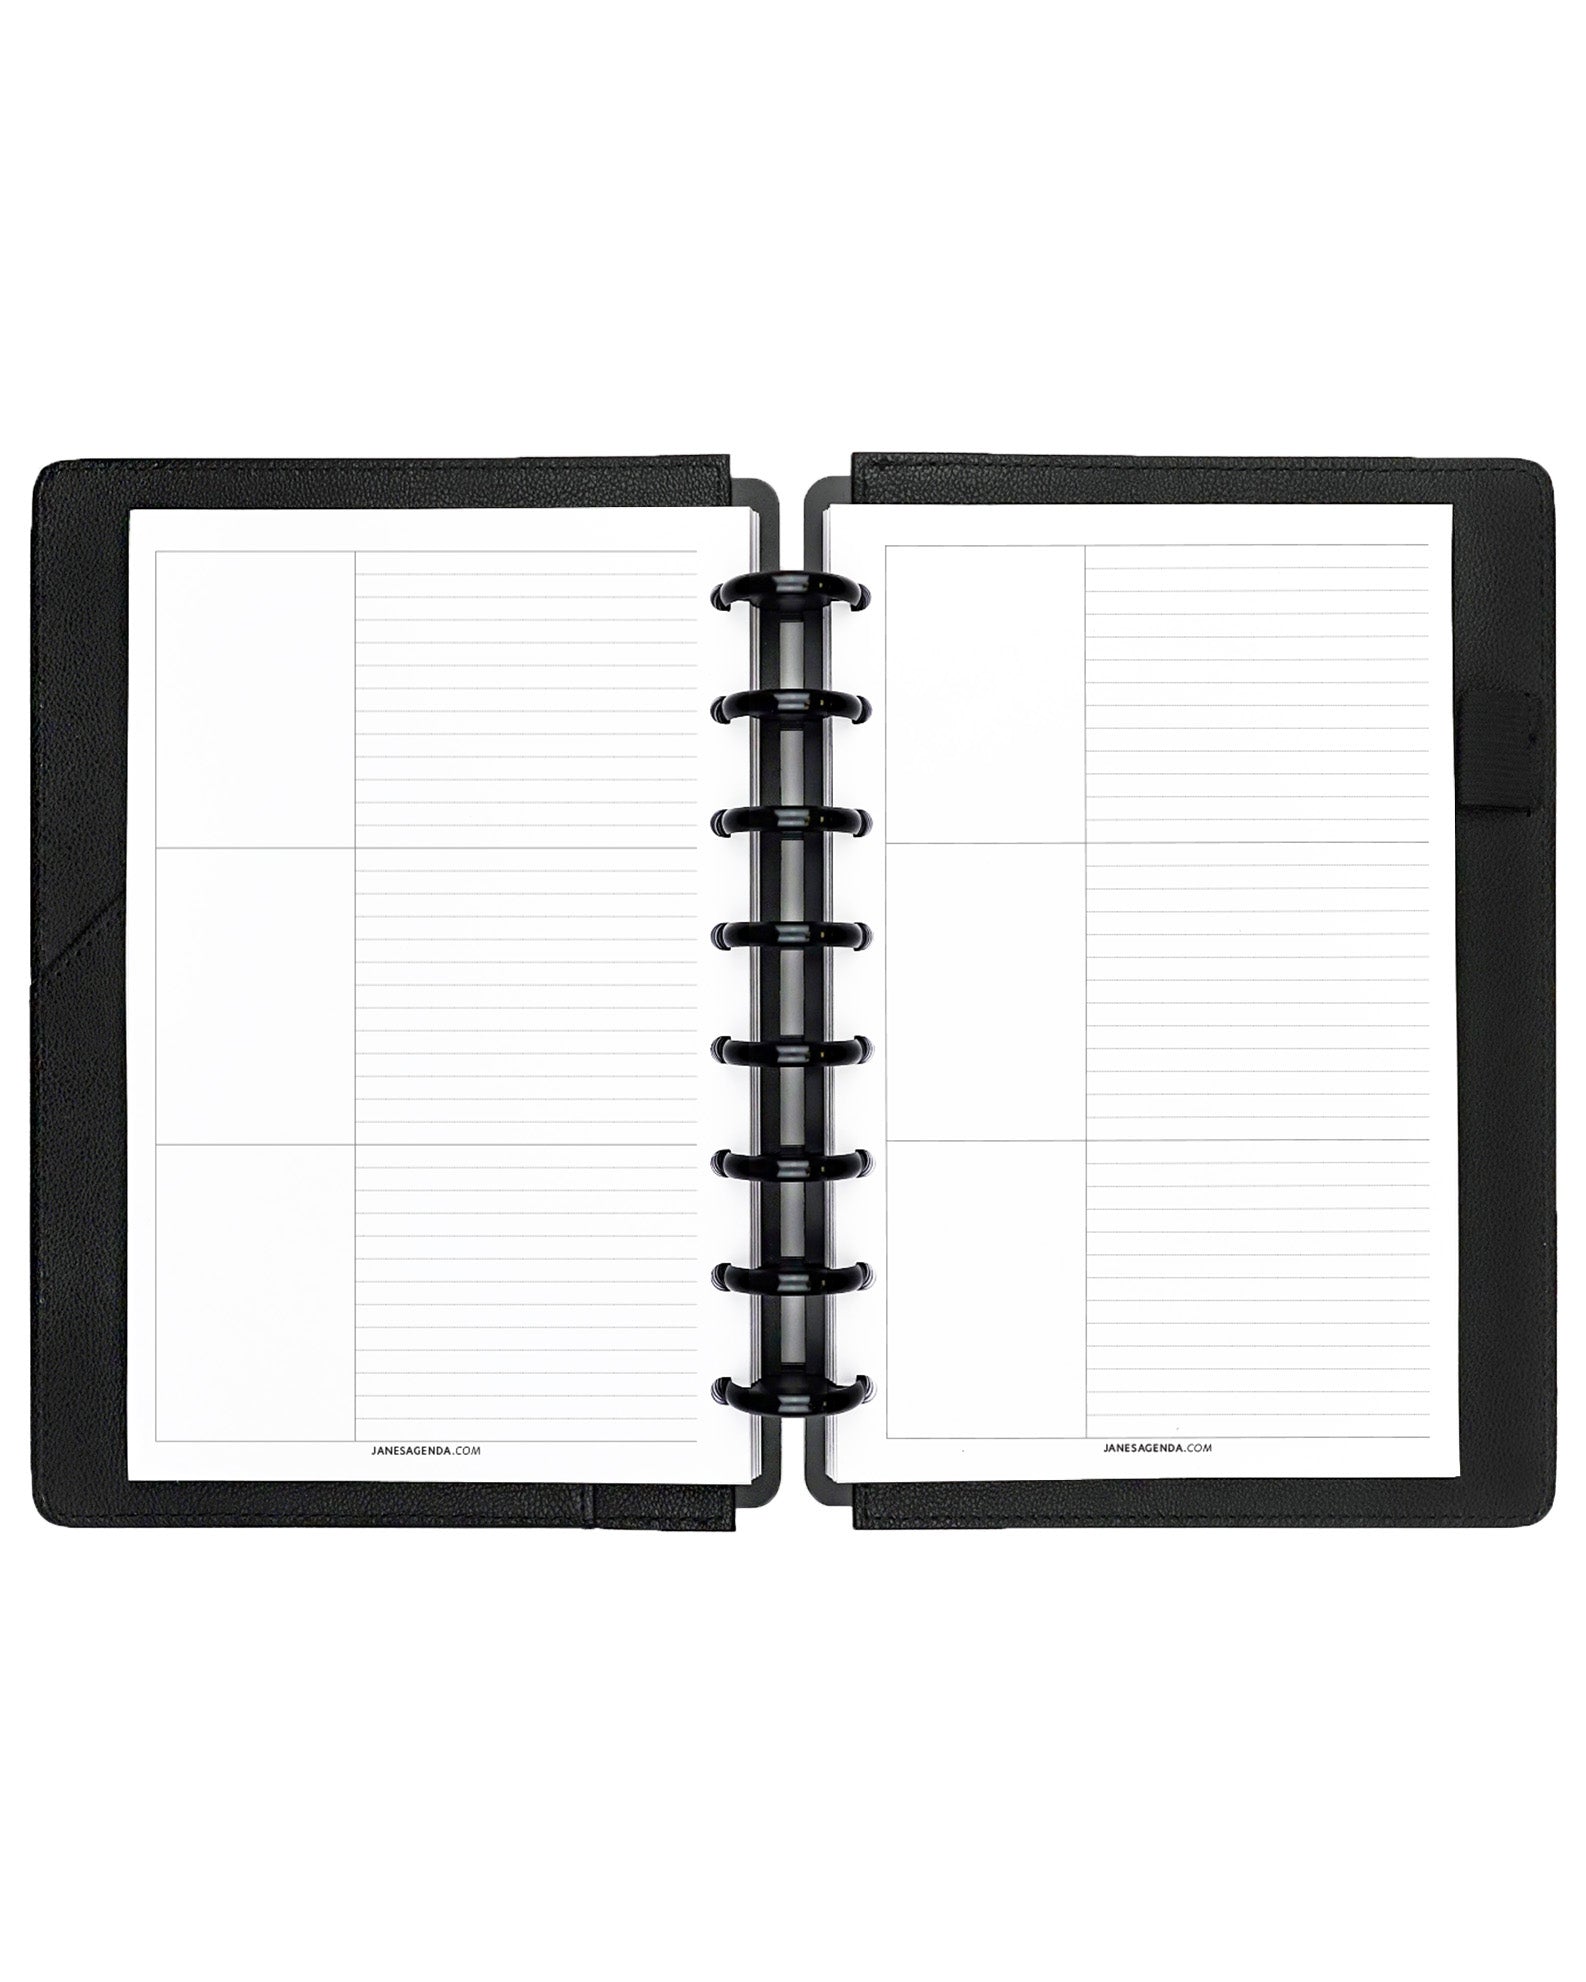 Tri-focus notes planner inserts for discbound planners, disc notebooks, and A5 six ring planner systems by Jane's Agenda.